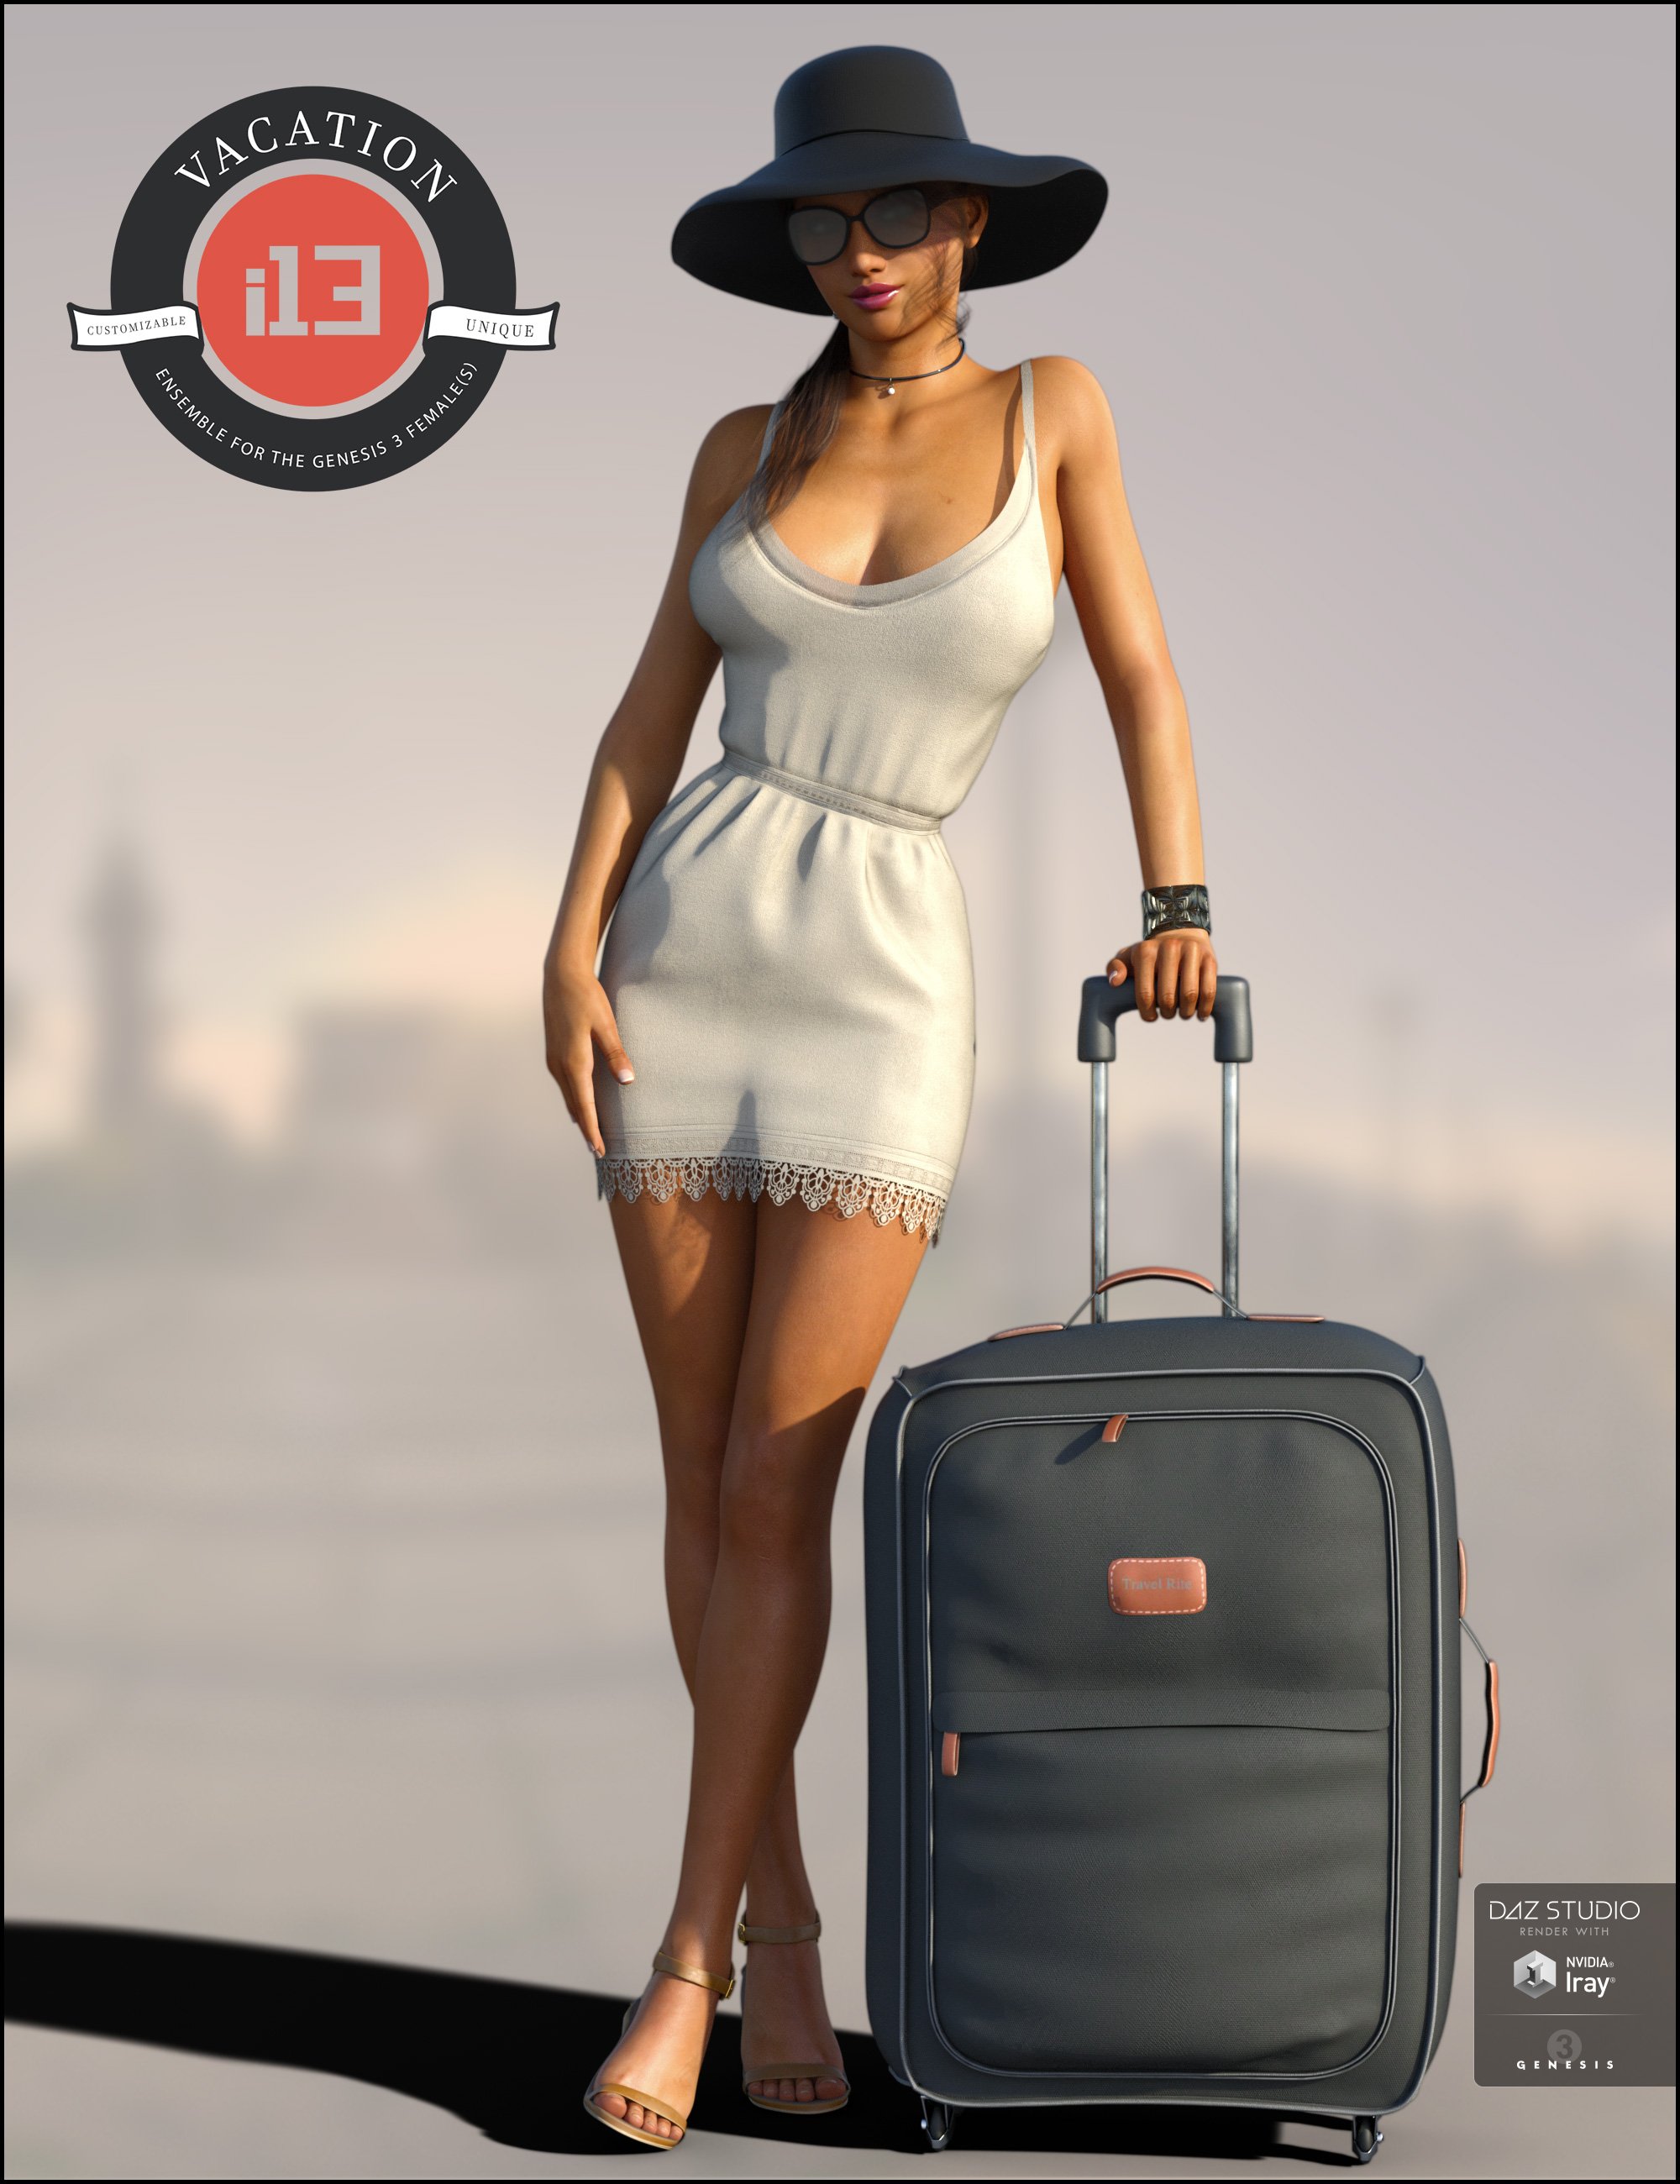 i13 Vacation Outfit for the Genesis 3 Female(s) by: ironman13, 3D Models by Daz 3D